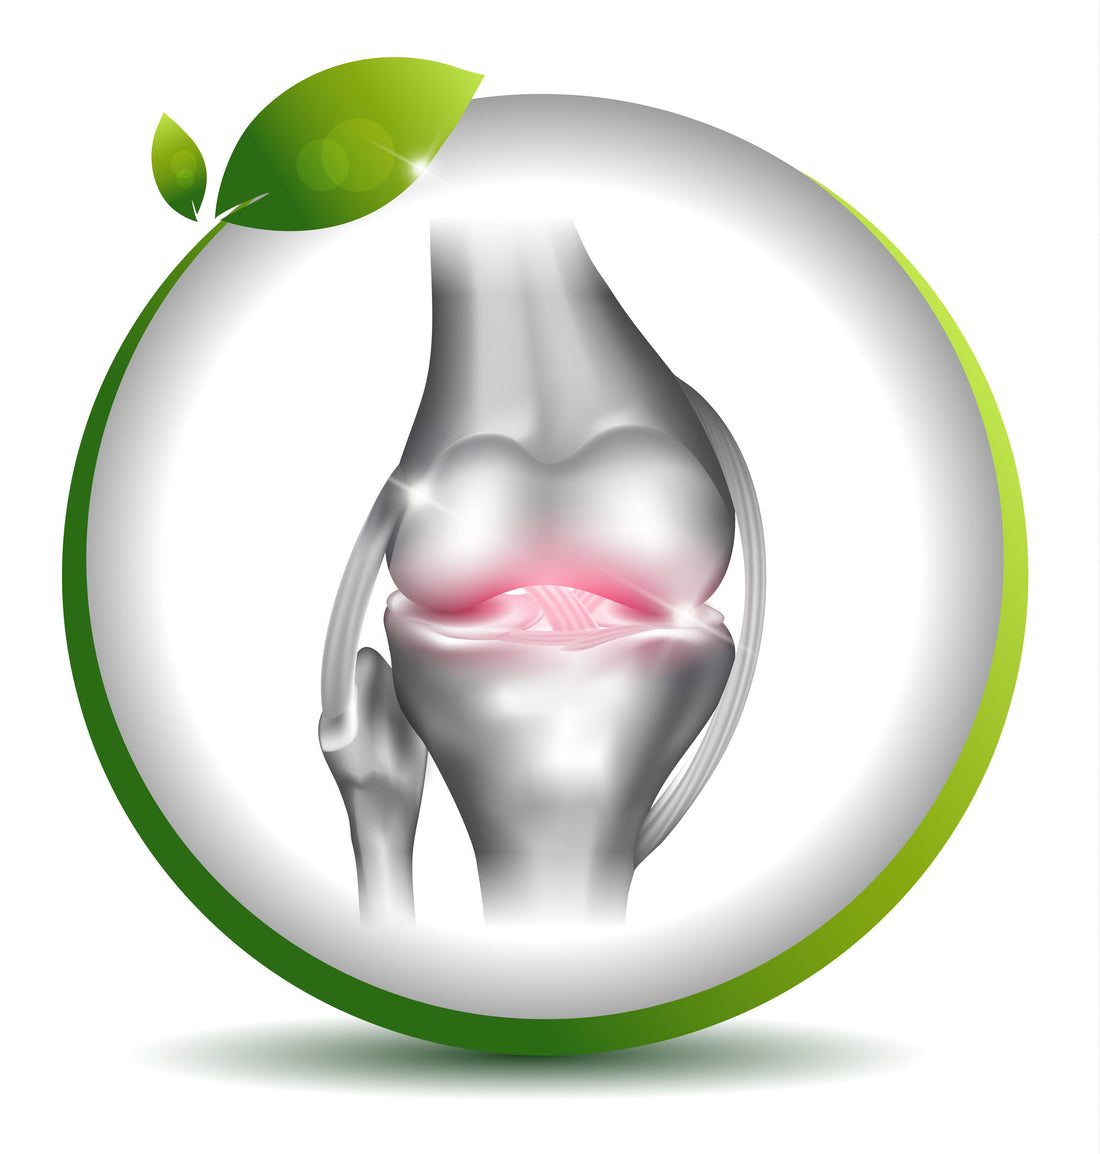 Joint Pain - alternative therapies and remedies